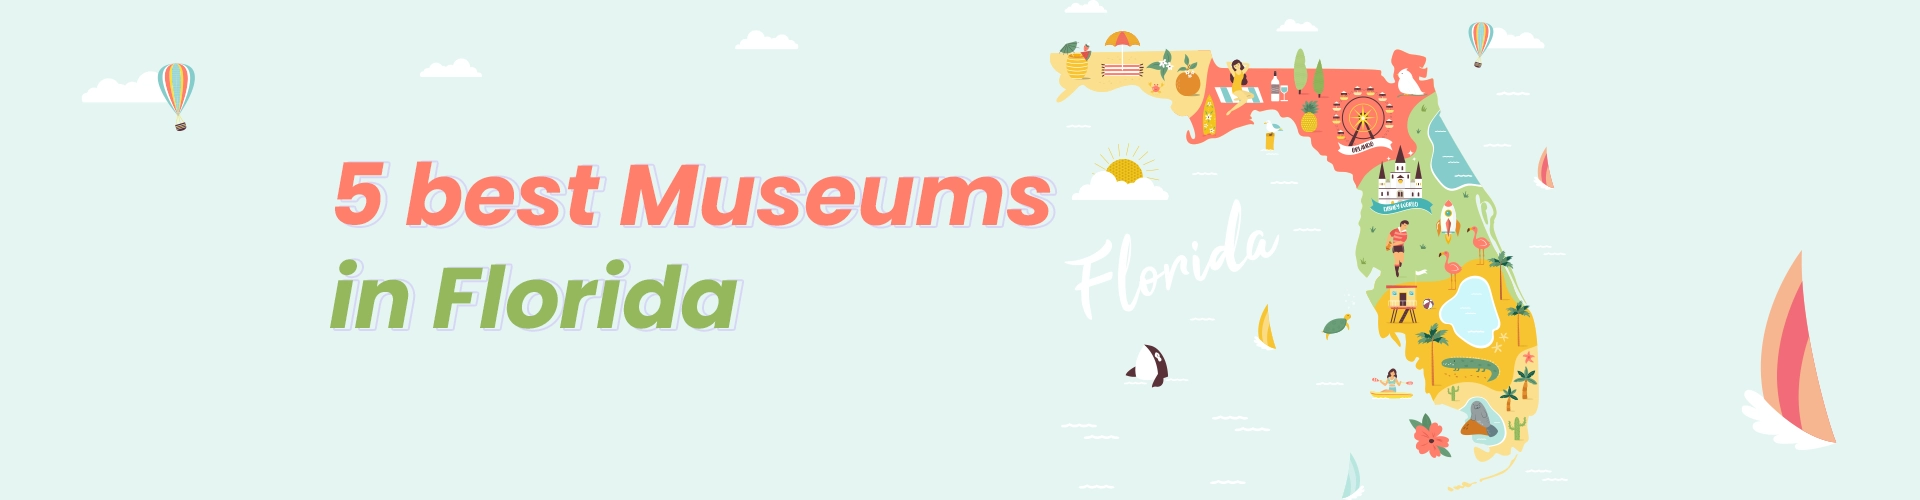 Best Museums in Florida, USA